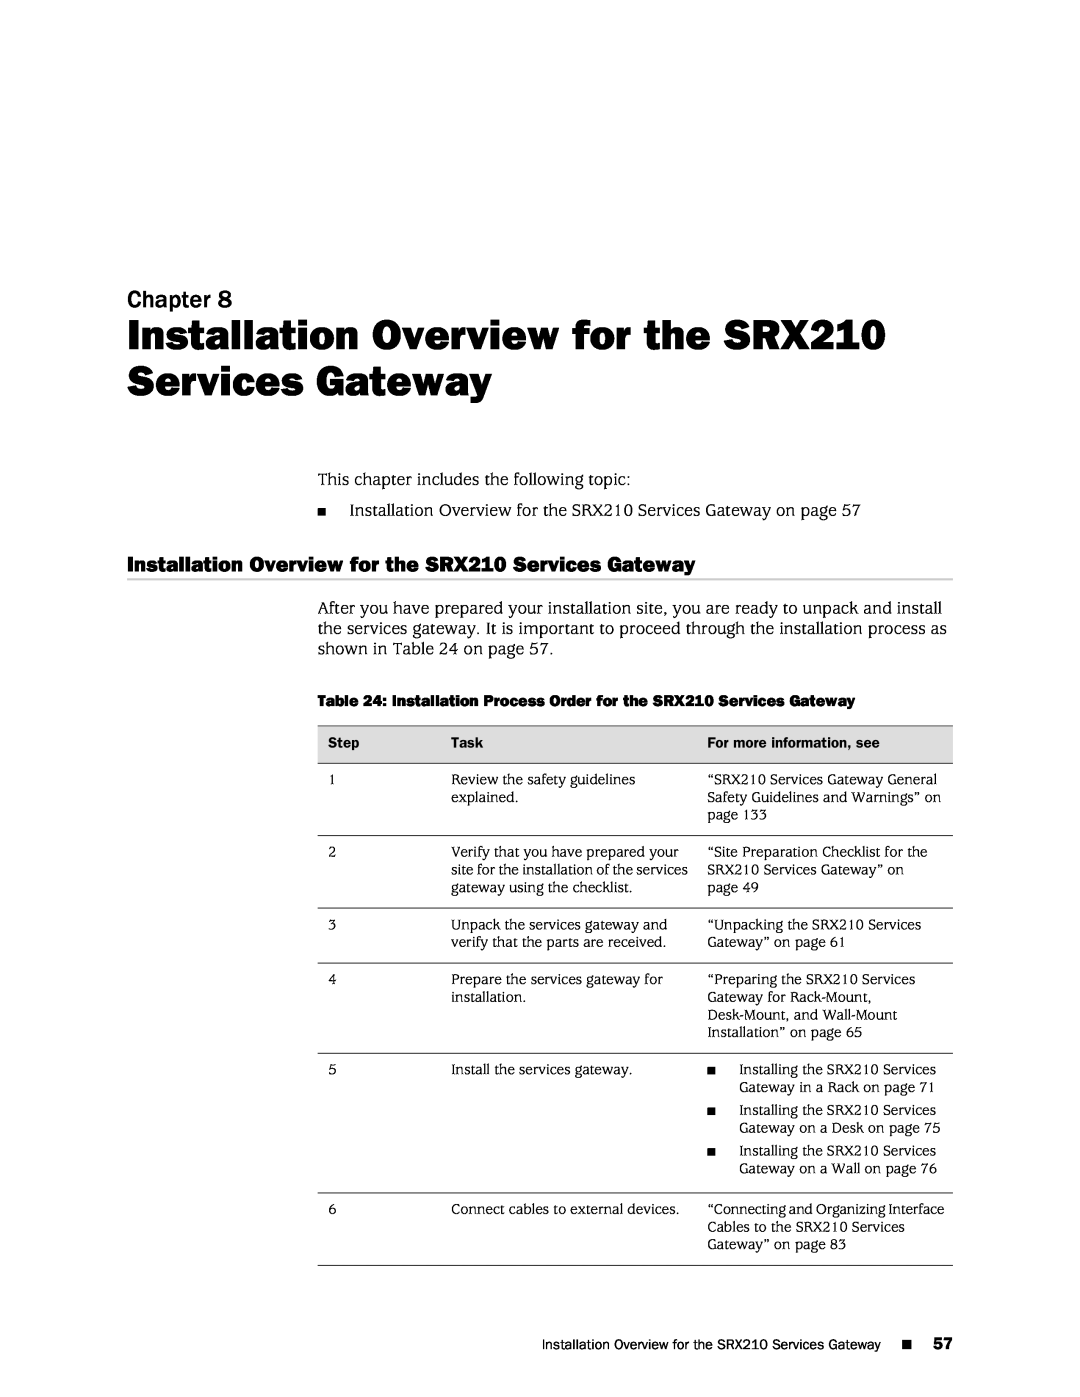 Juniper Networks SRX 210 manual Installation Overview for the SRX210 Services Gateway, Chapter 